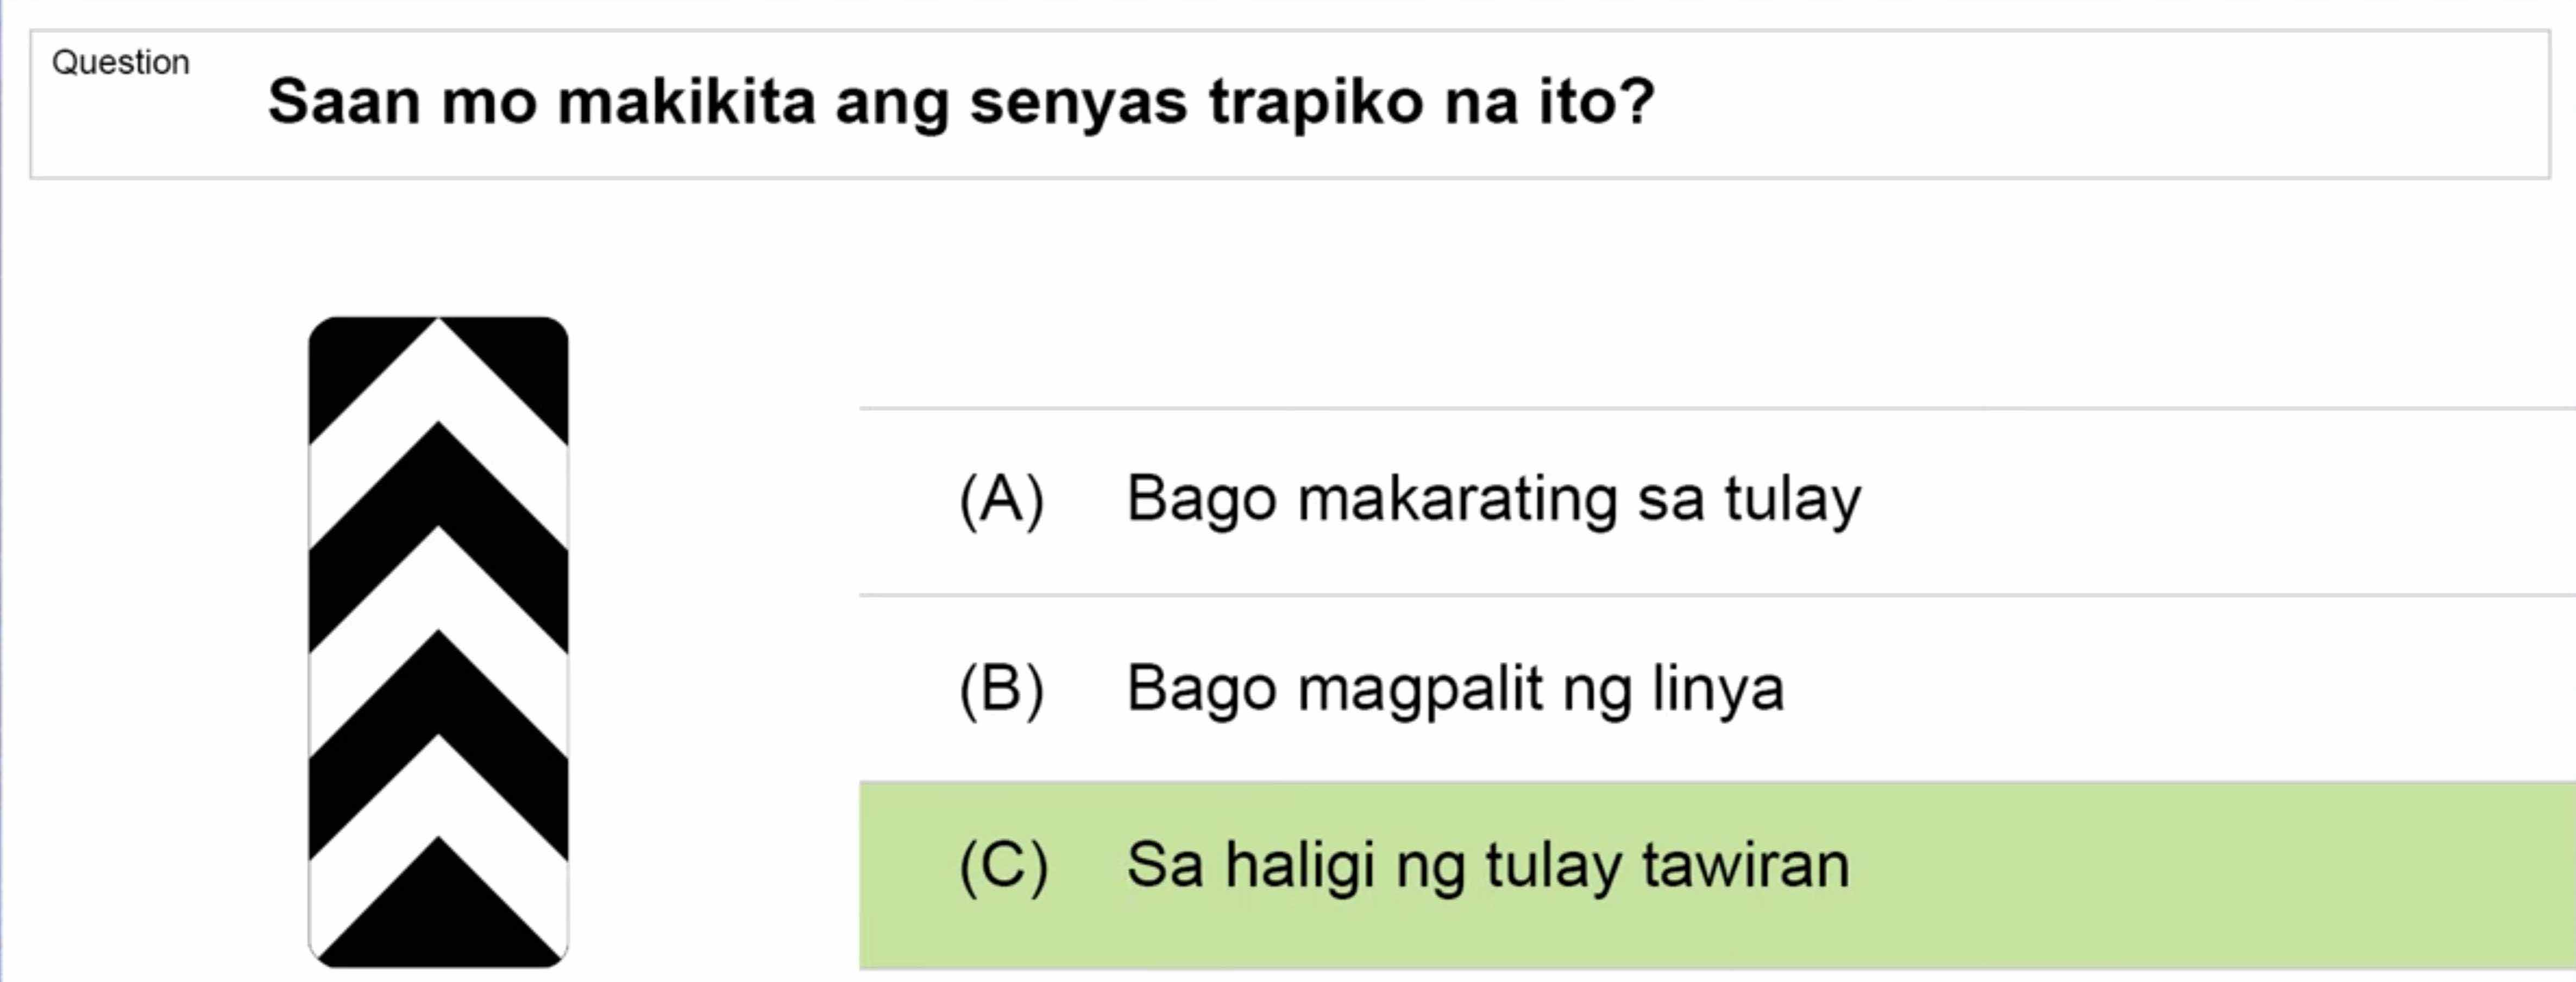 LTO Tagalog non professional exam reviewer motorcycle 1 (60)